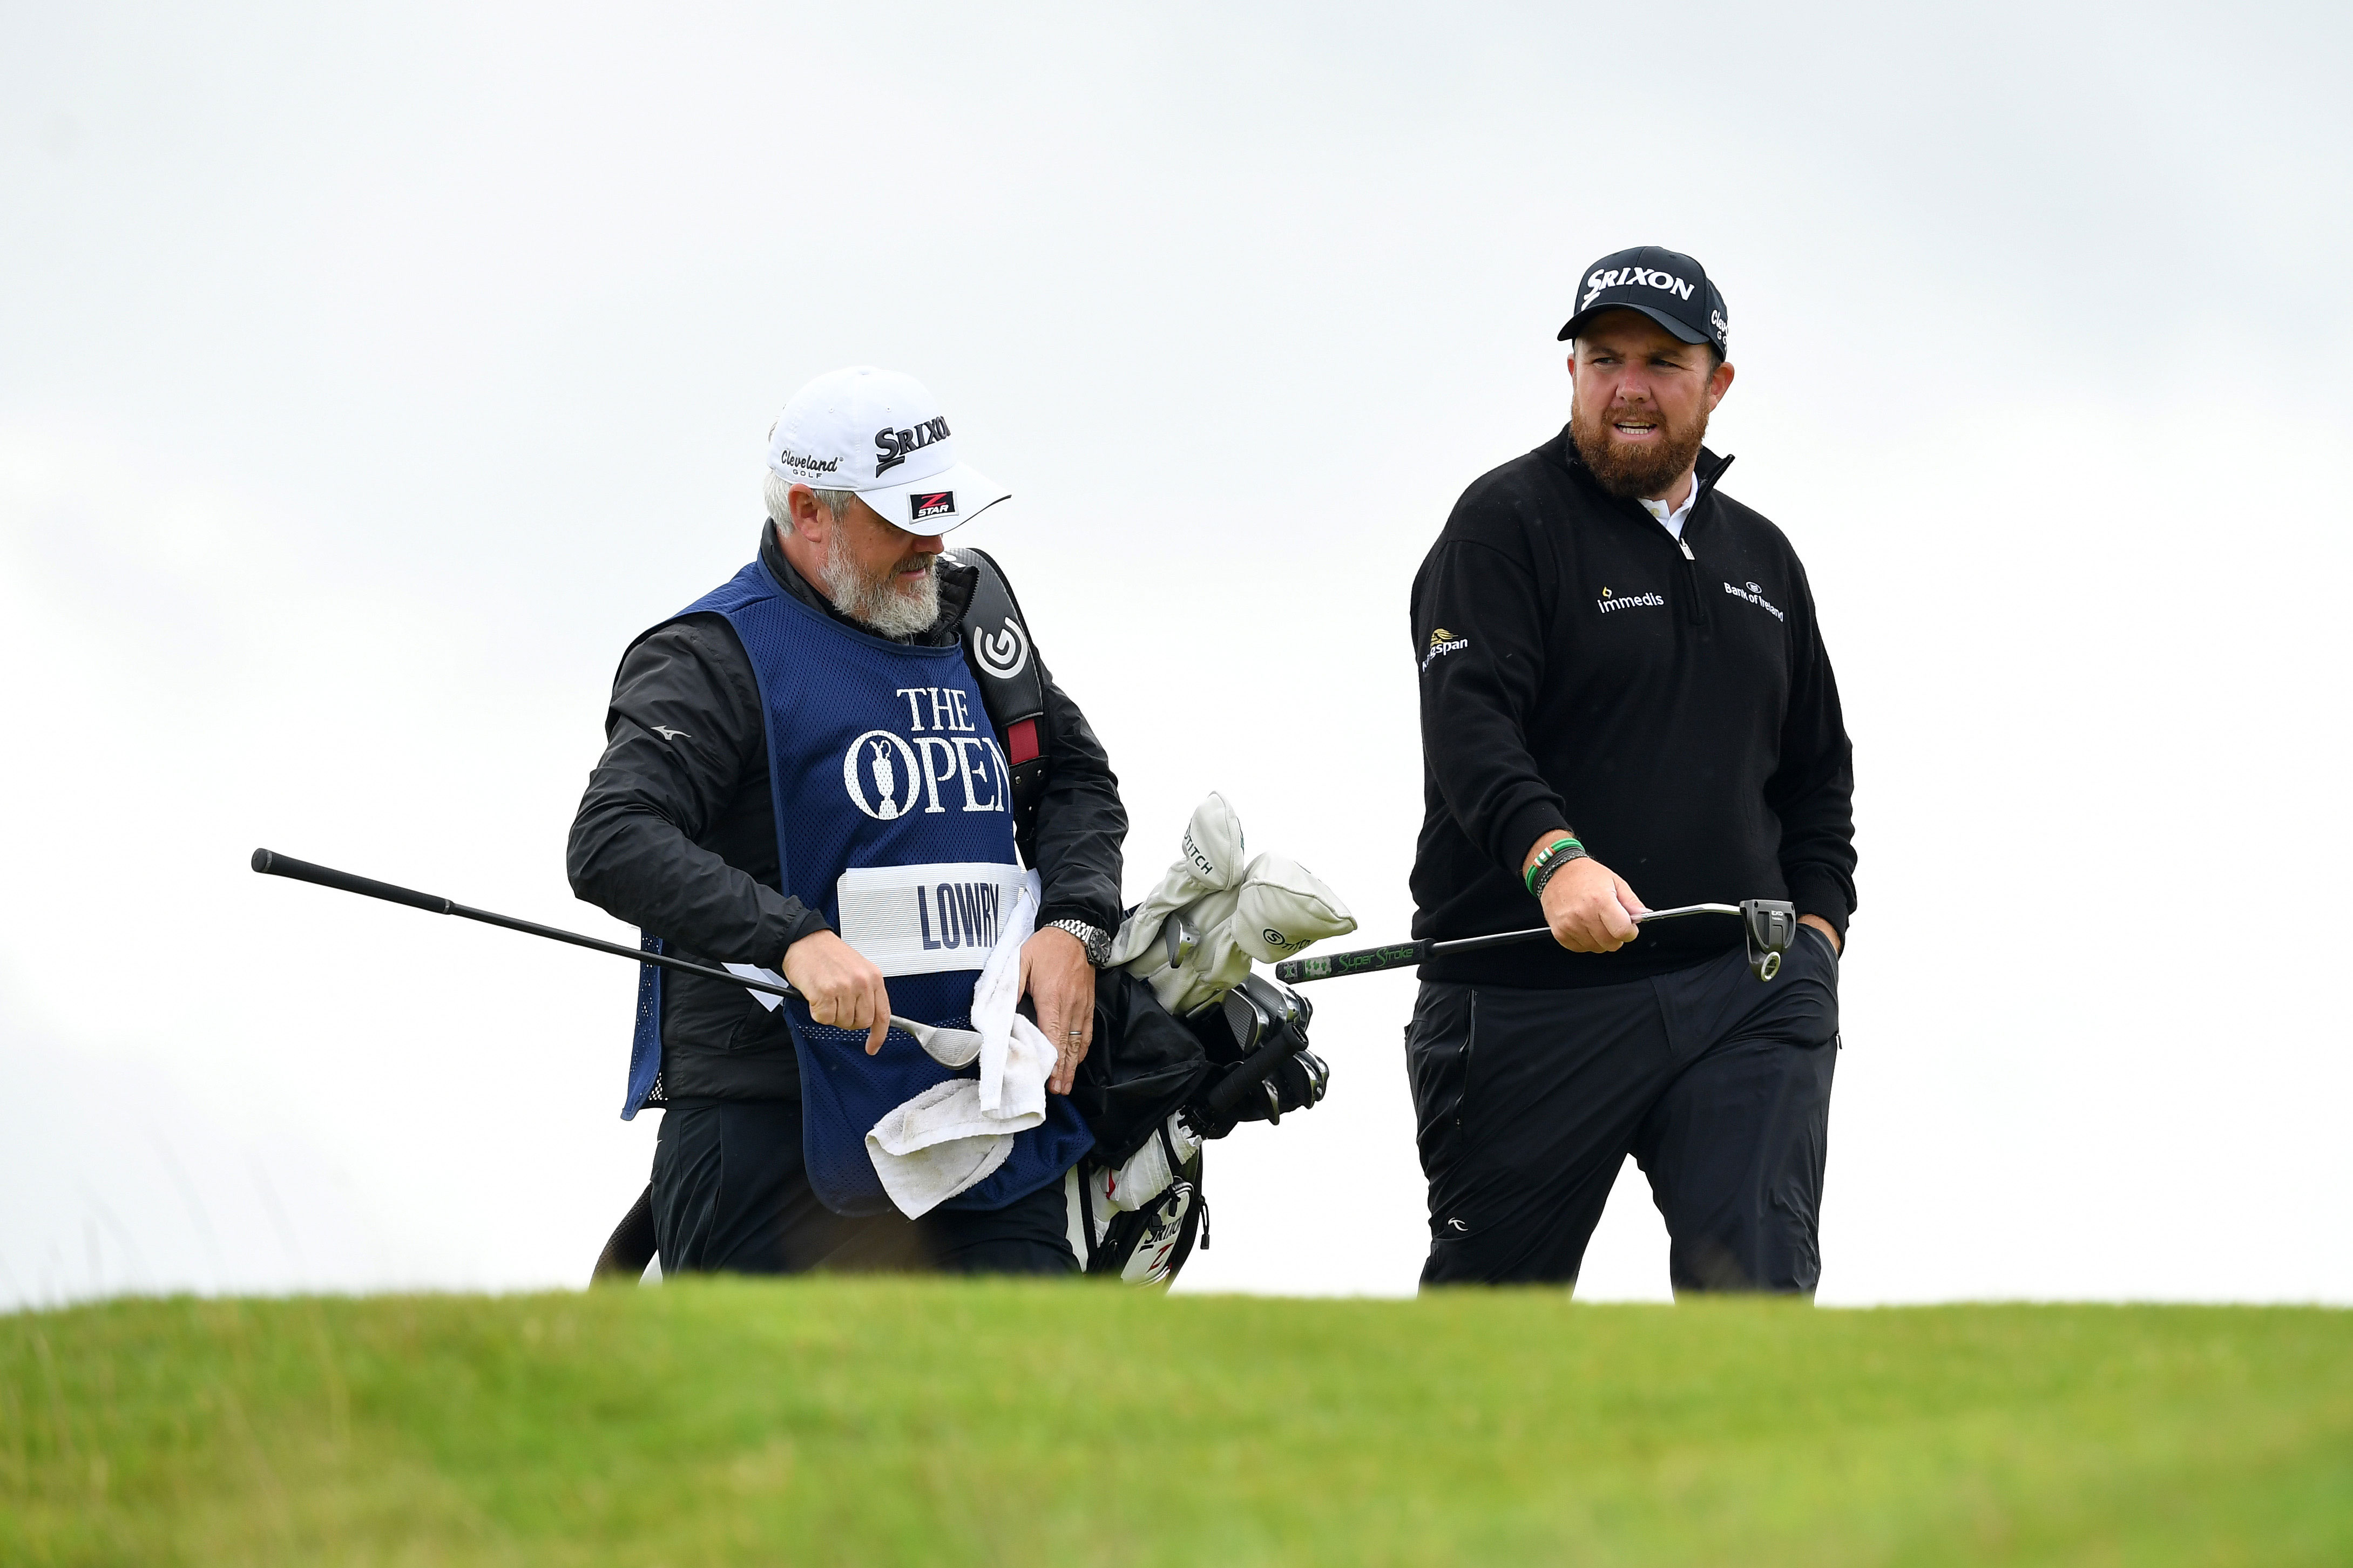 Uundgåelig I nåde af Industriel British Open 2019: An Irish golfer is near the lead after Day 1 at  Portrush. Just not the one most figured | Golf News and Tour Information |  Golf Digest